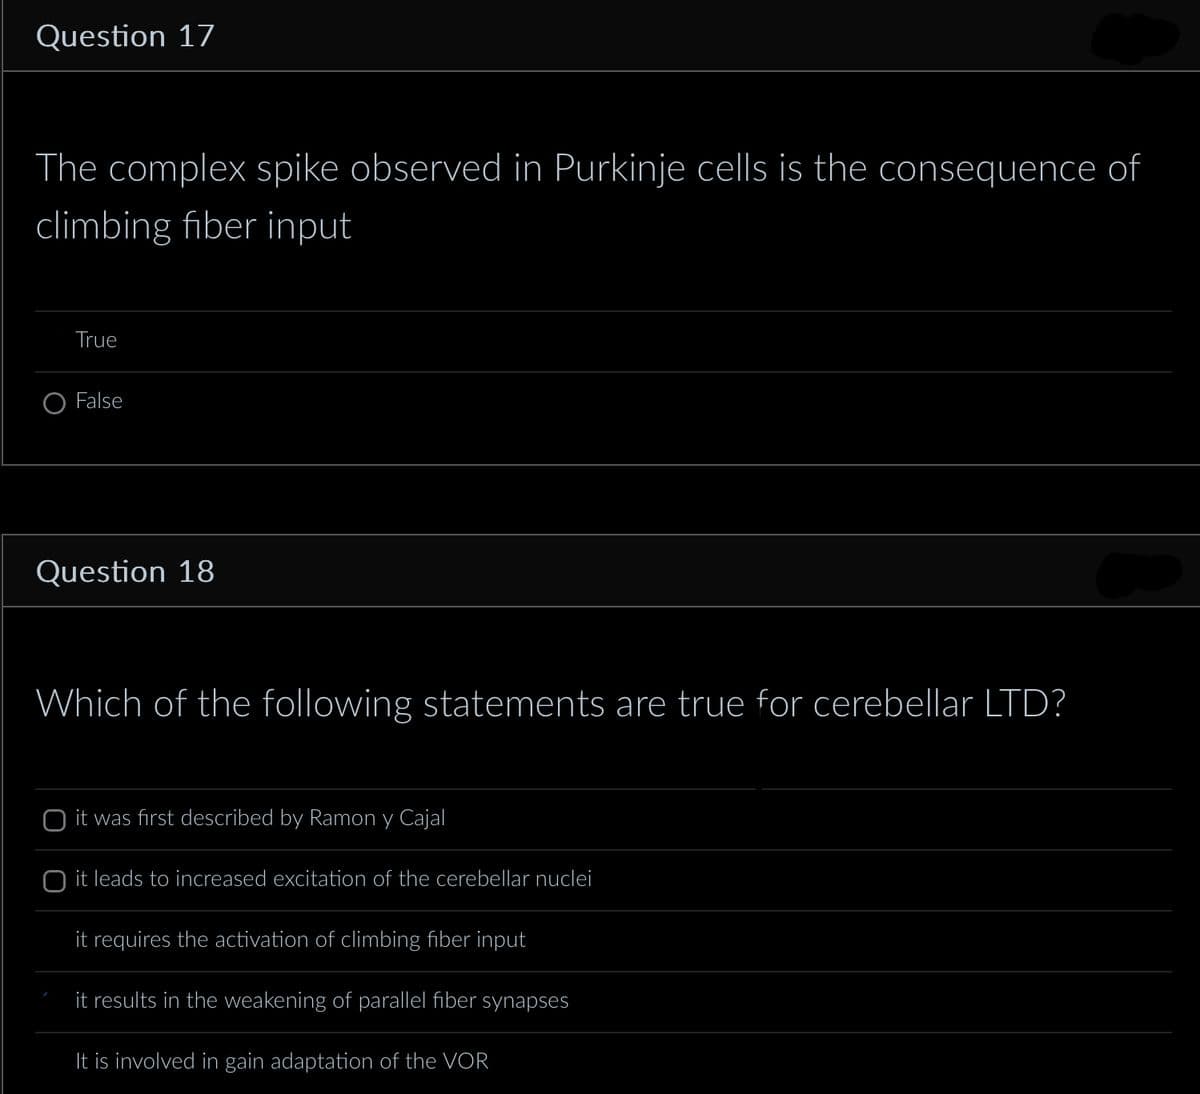 Question 17
The complex spike observed in Purkinje cells is the consequence of
climbing fiber input
True
False
Question 18
Which of the following statements are true for cerebellar LTD?
it was first described by Ramon y Cajal
O it leads to increased excitation of the cerebellar nuclei
it requires the activation of climbing fiber input
it results in the weakening of parallel fiber synapses
It is involved in gain adaptation of the VOR